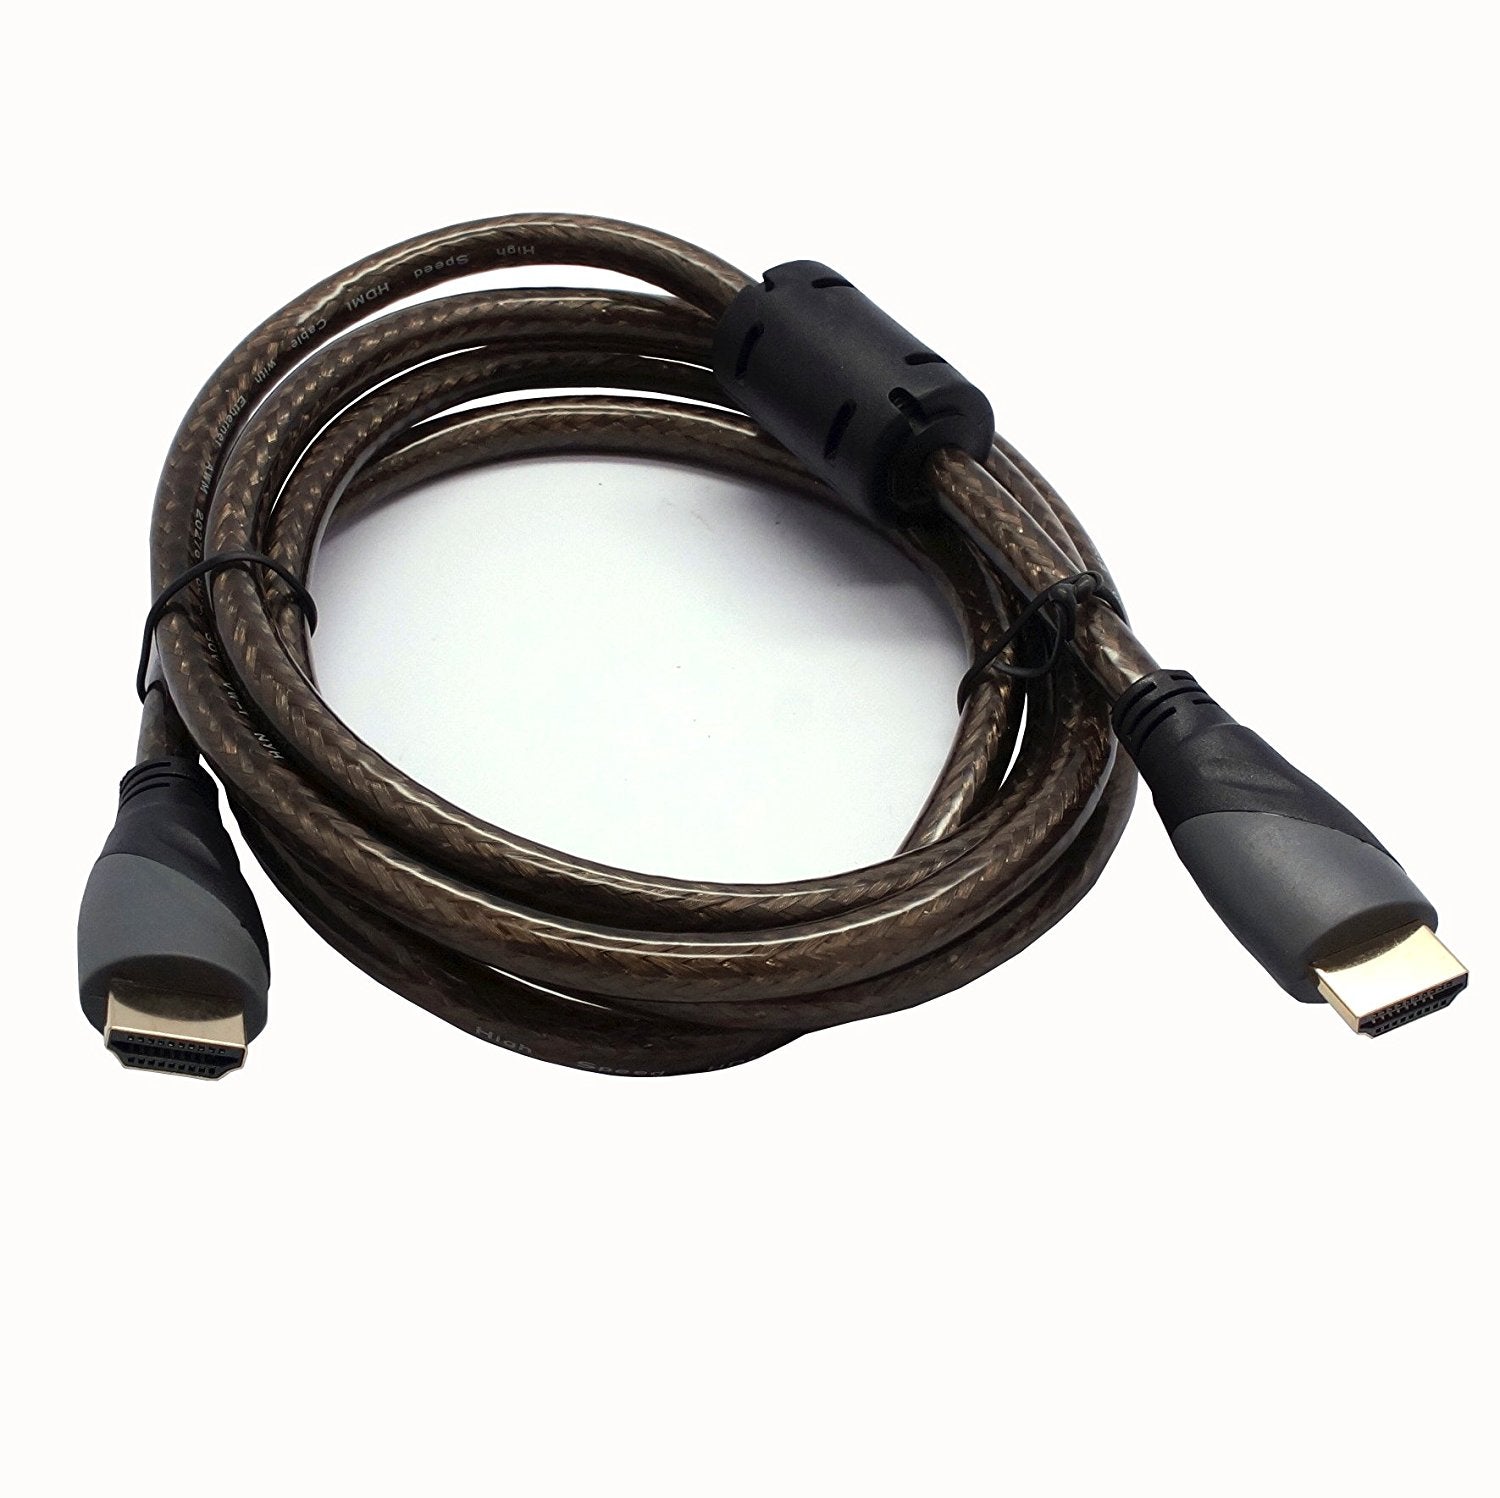 6FT Premium HDMI Cable V1.4 1080P Ethernet BLURAY 3D TV DVD PS3 HDTV Xbox LCD LED -- by CyberTech®